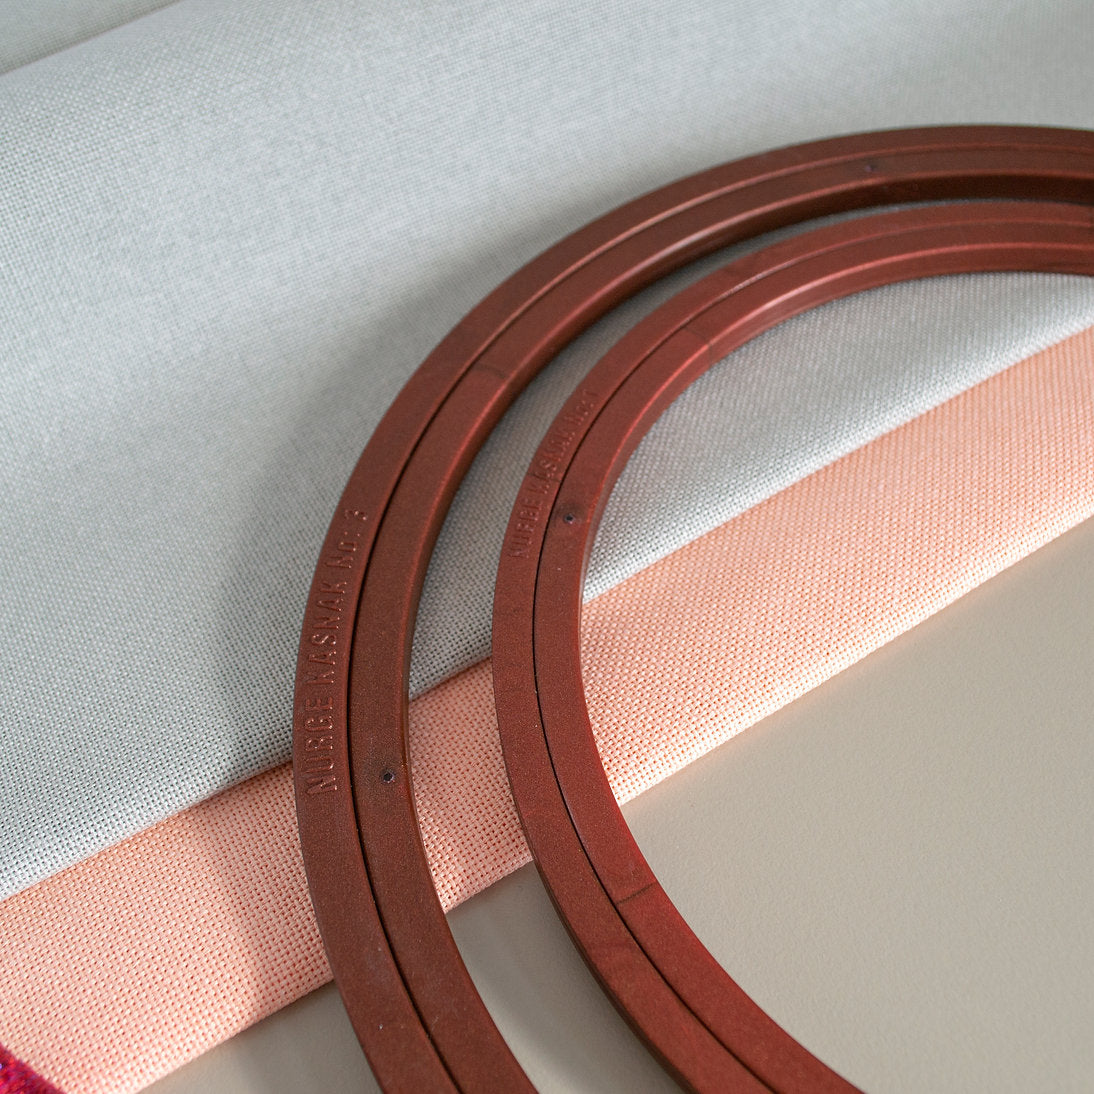 170 Nurge Screwless Plastic Hoop Frame: Lightness and Firmness in Your Embroidery Projects